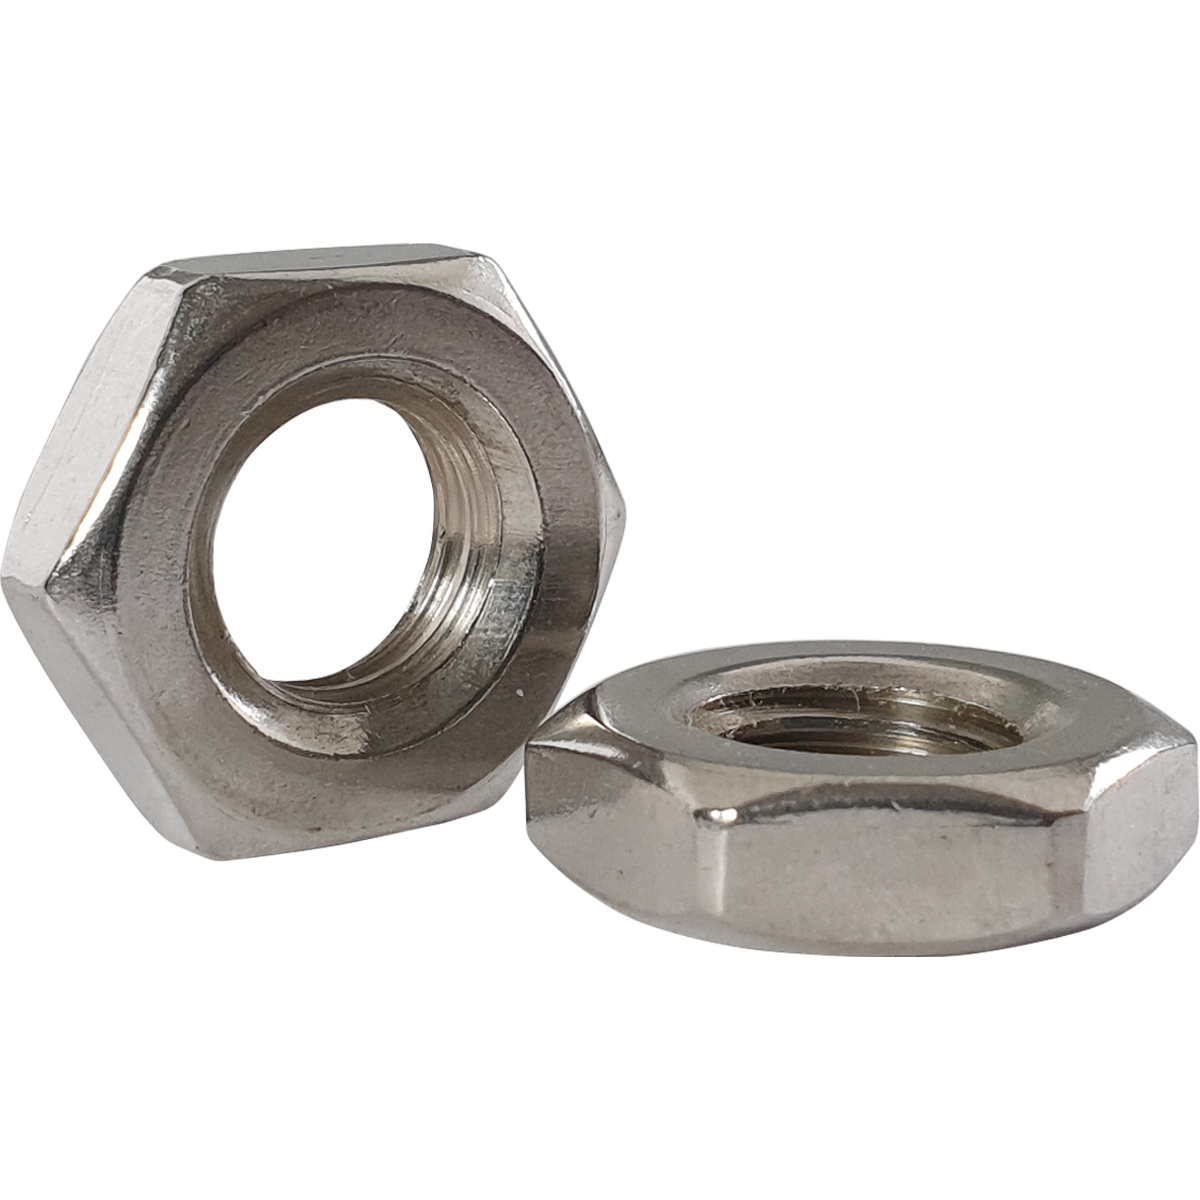 Hexagon thin lock nuts, also known as hex half nuts, or hex lock nuts are available at competitive prices here at Fusion Fixings.